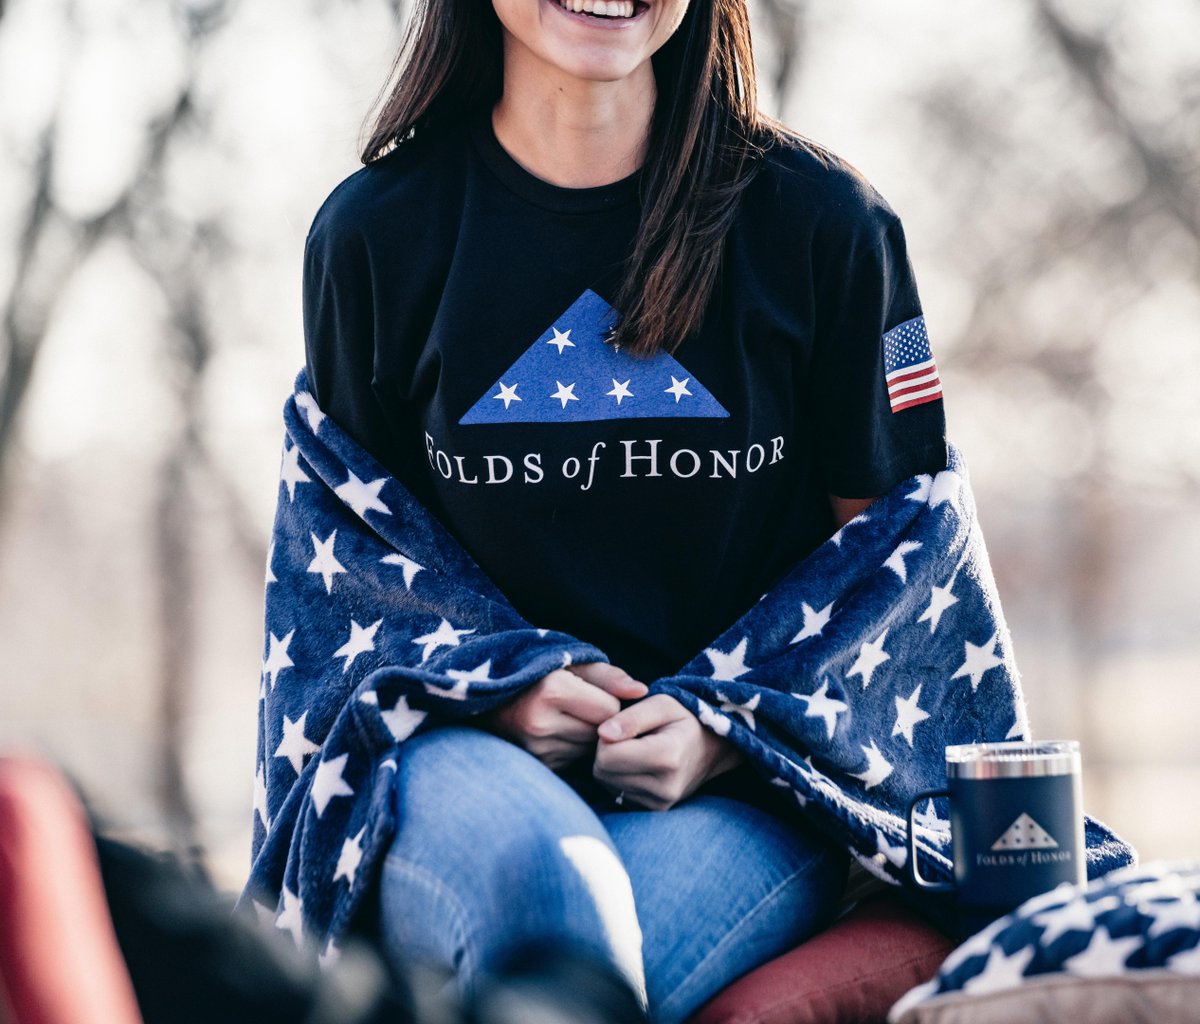 FoldsofHonor tweet picture